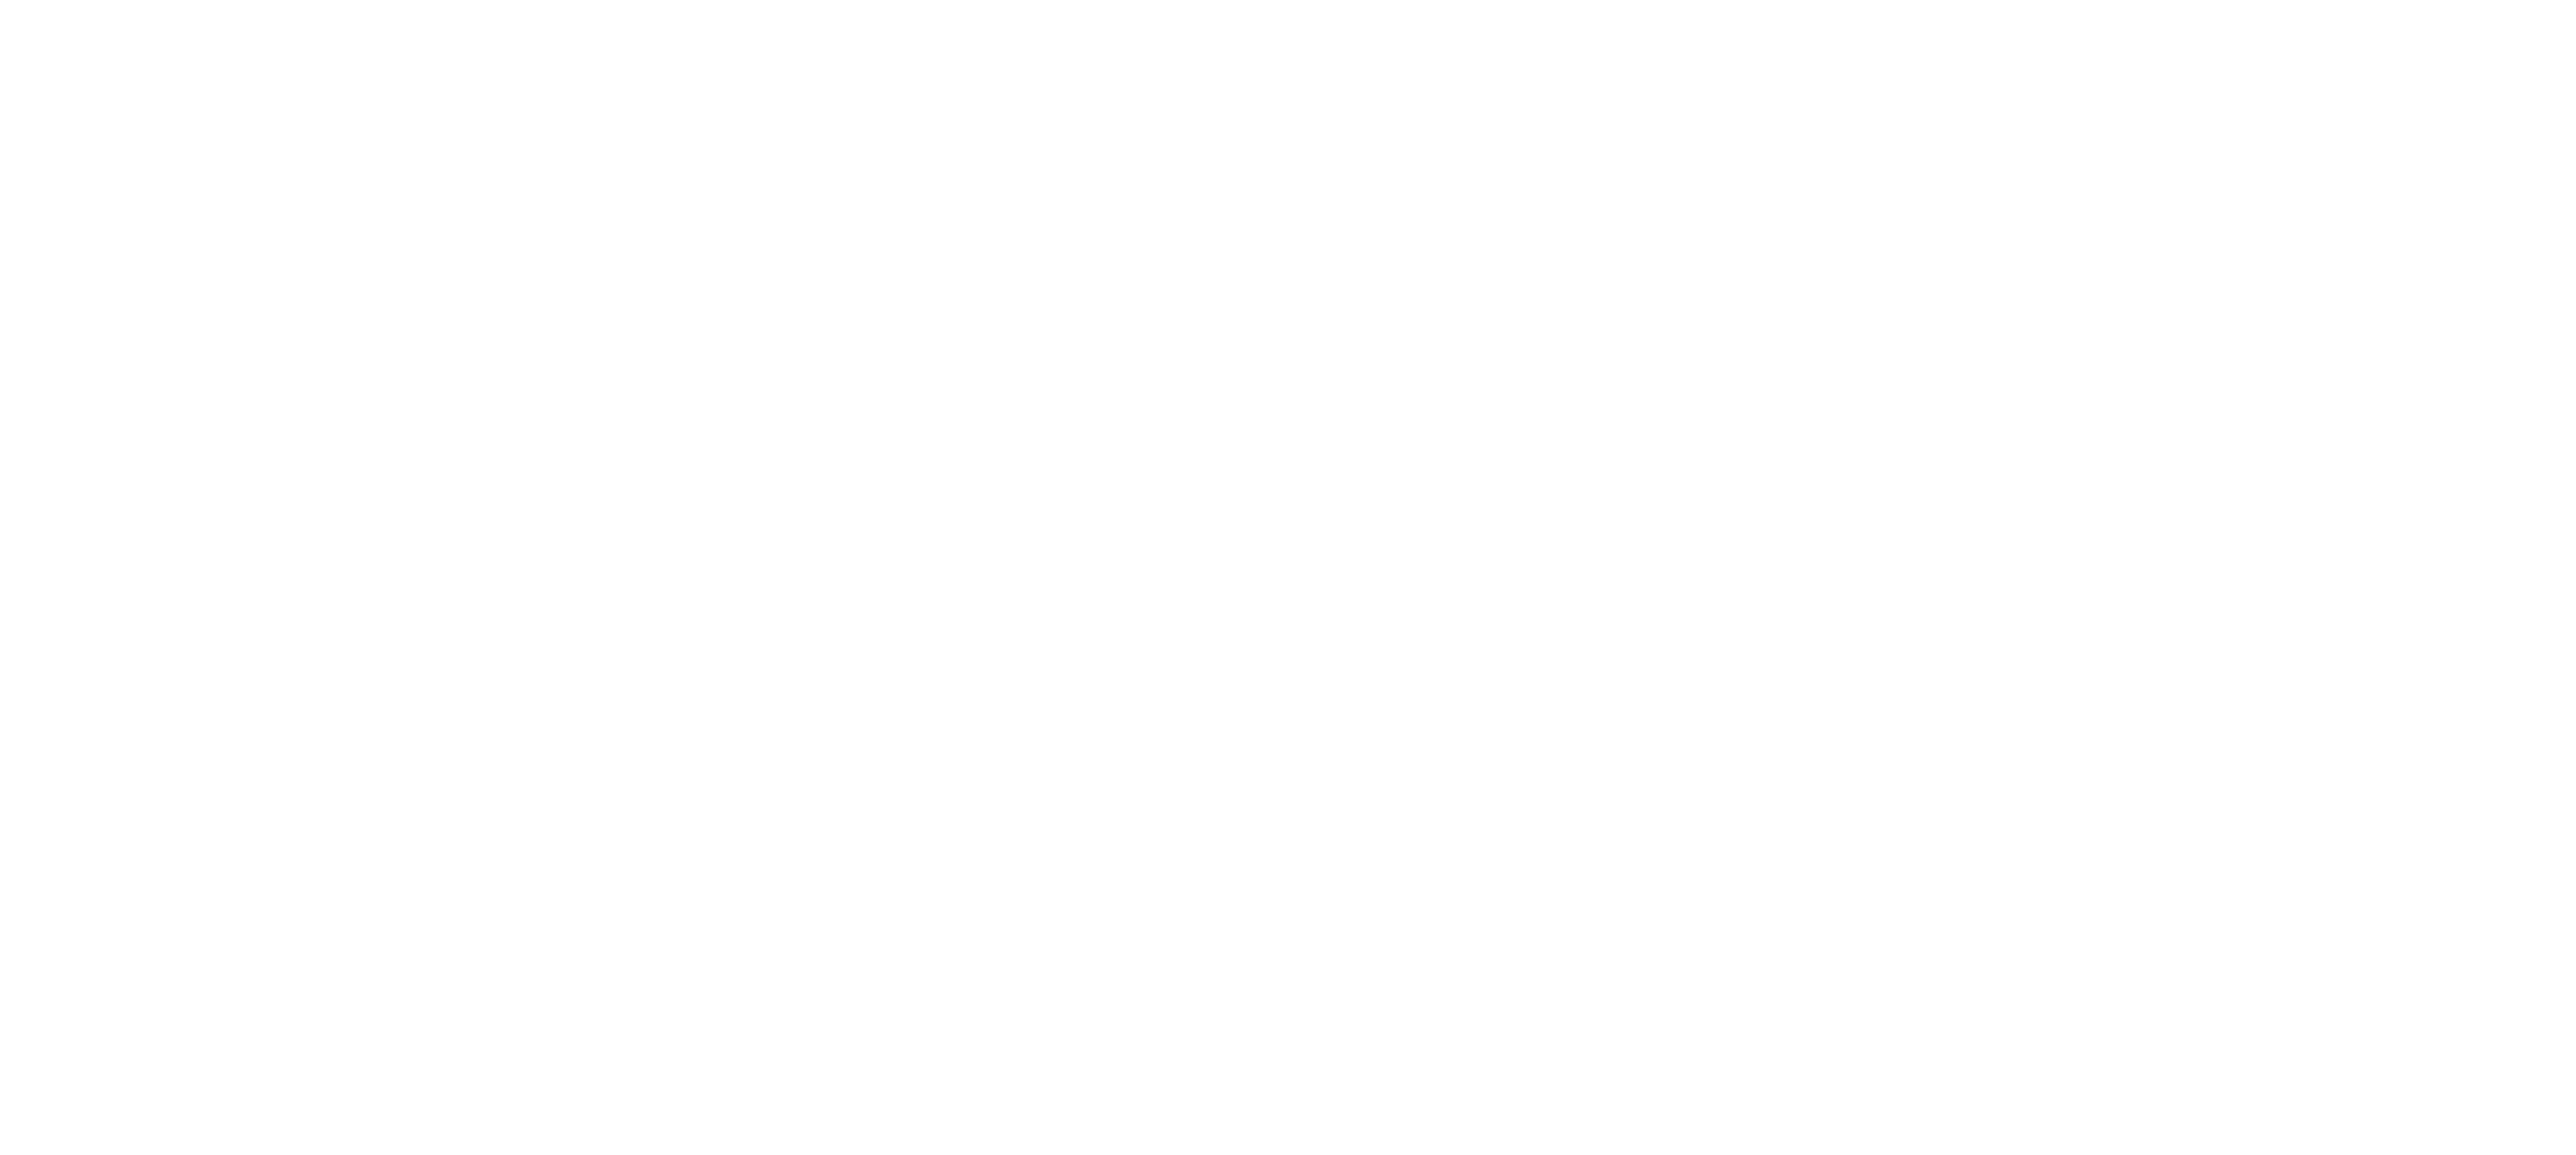 The Daily Traffic